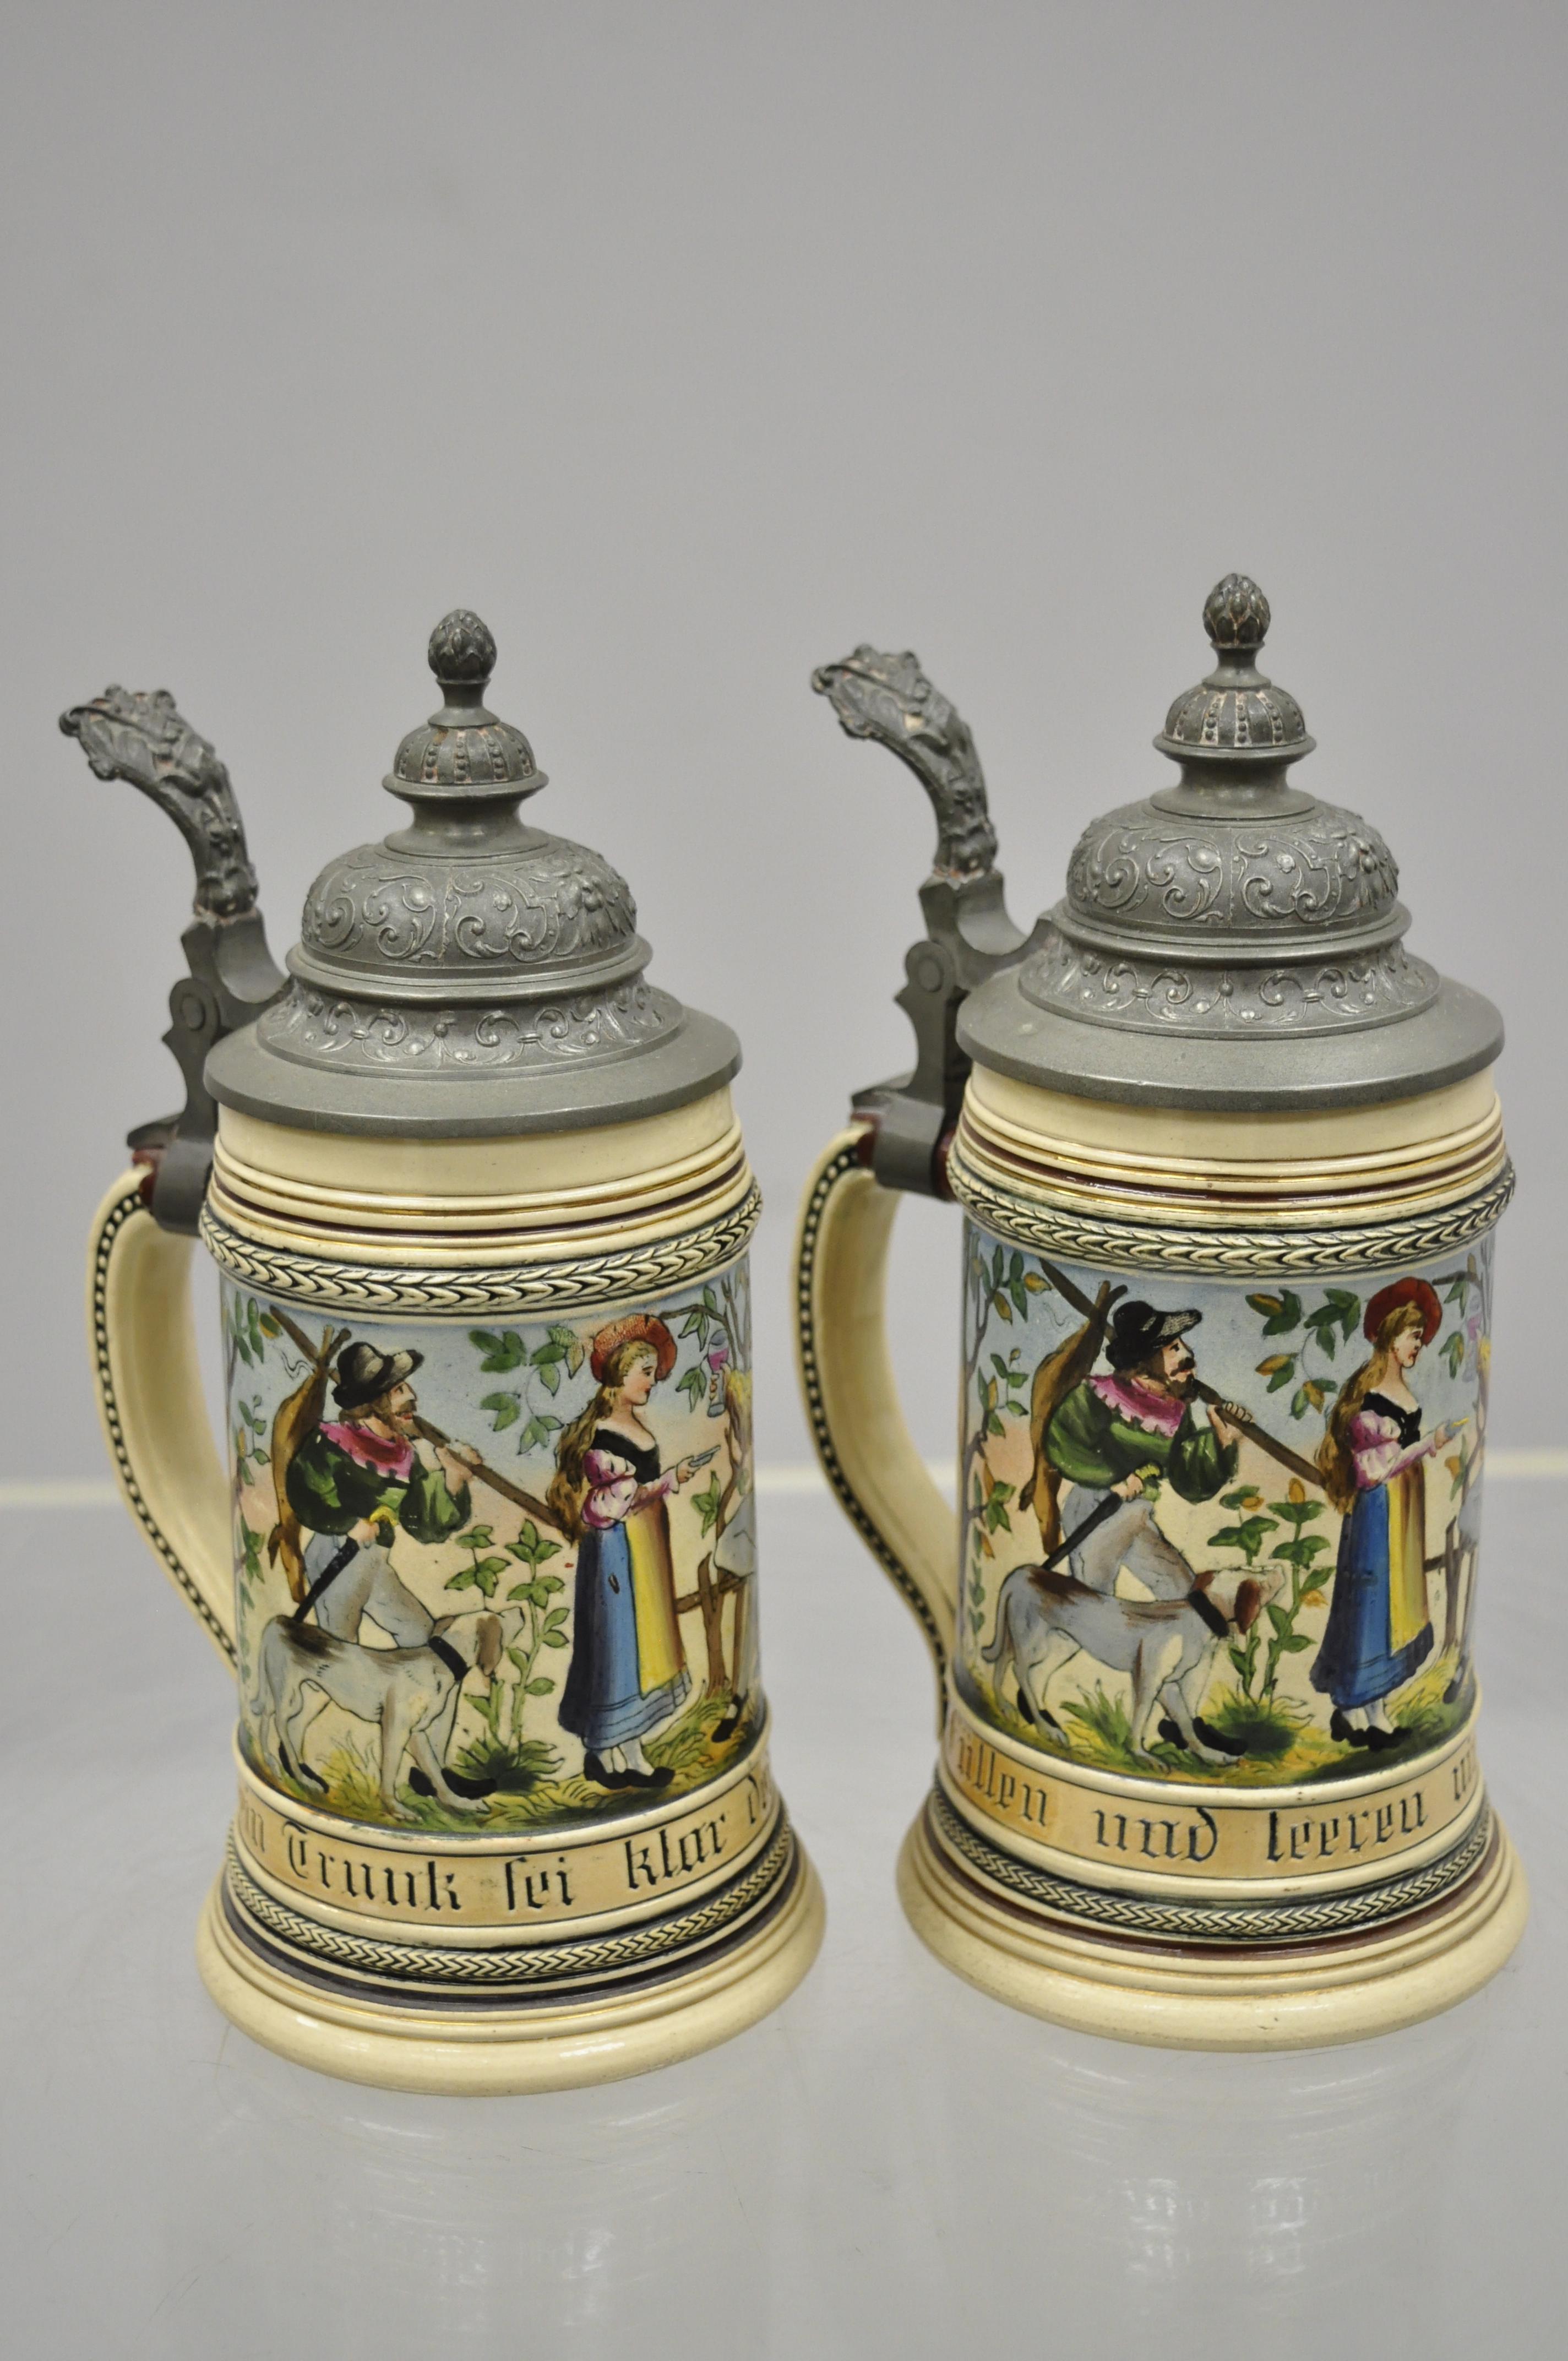 Details about   Vintage German Stein with Pewter Lid 7.5" 